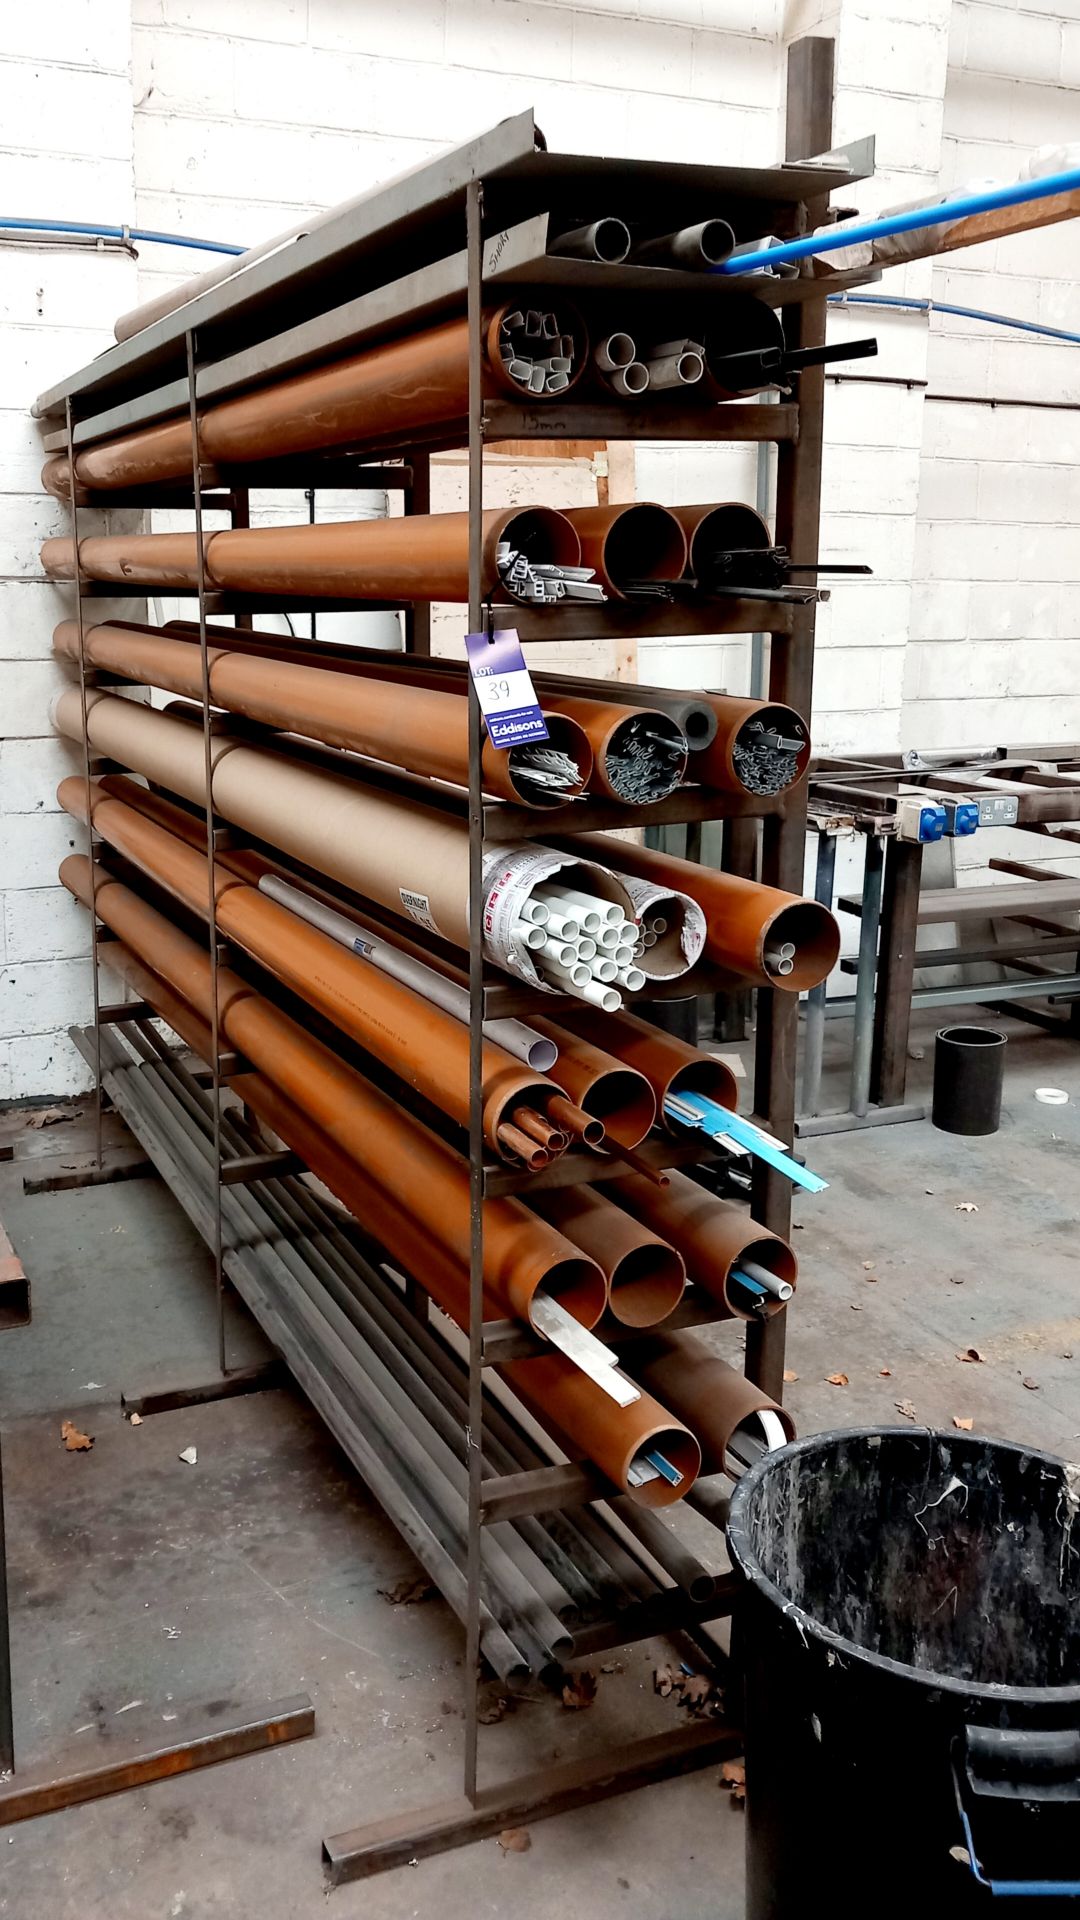 Stock rack and contents of various copper/plastic piping and trim